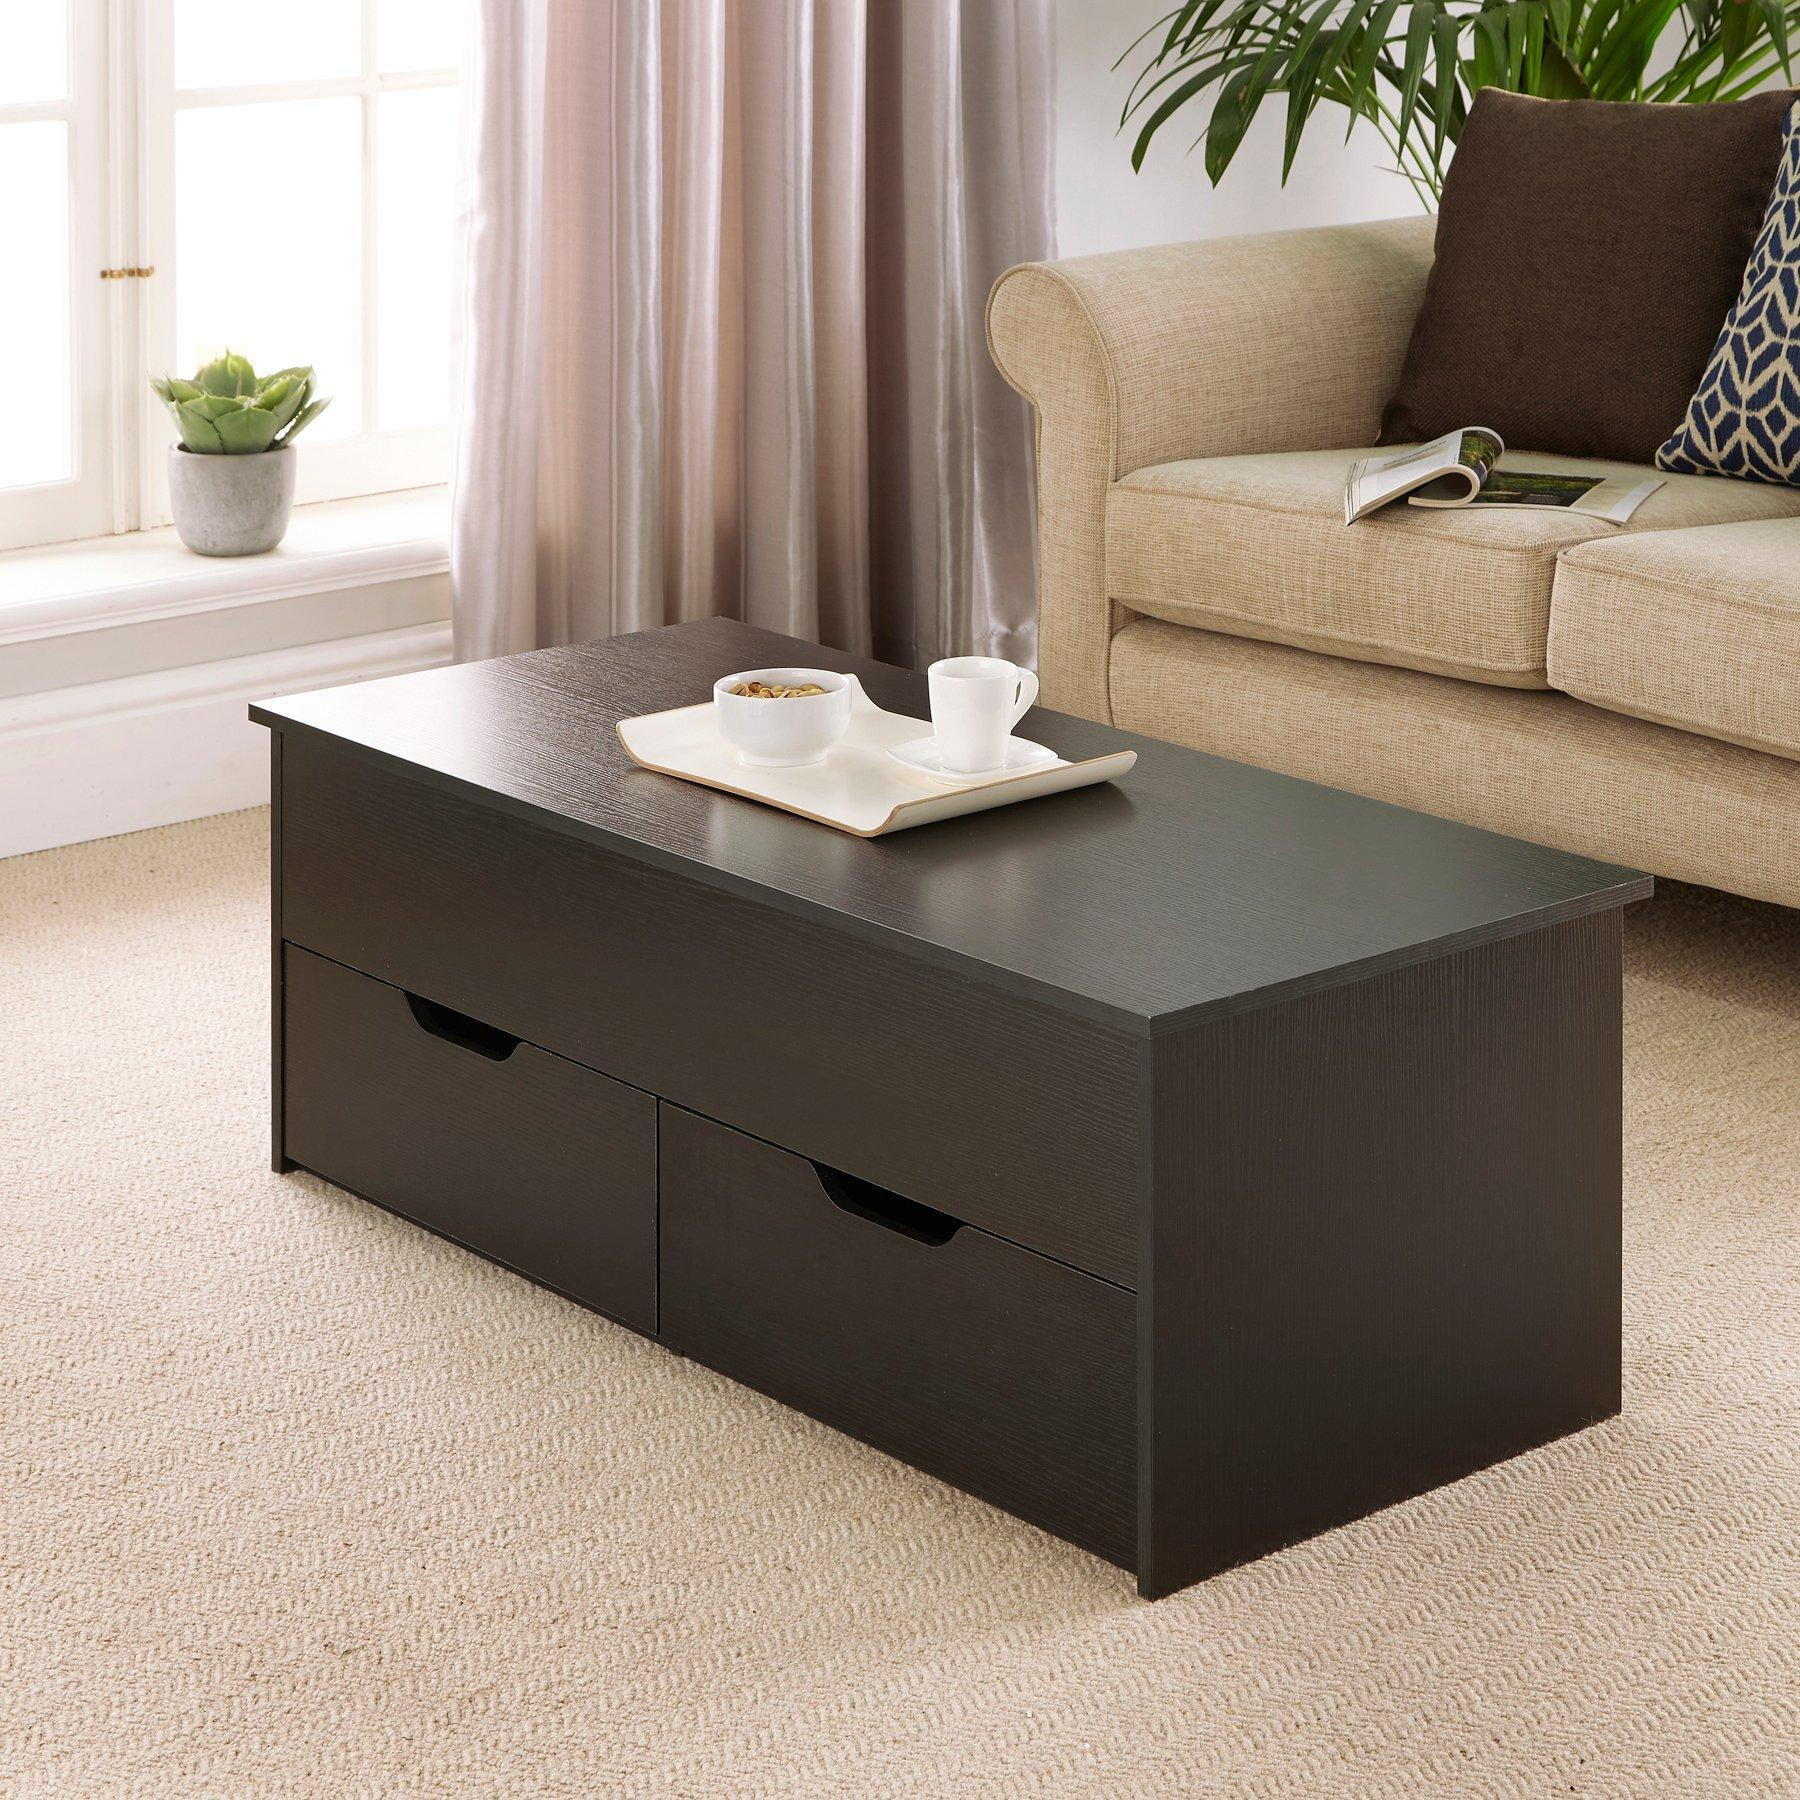 Bruges 2 Drawer Lift Up Coffee Table - image 1